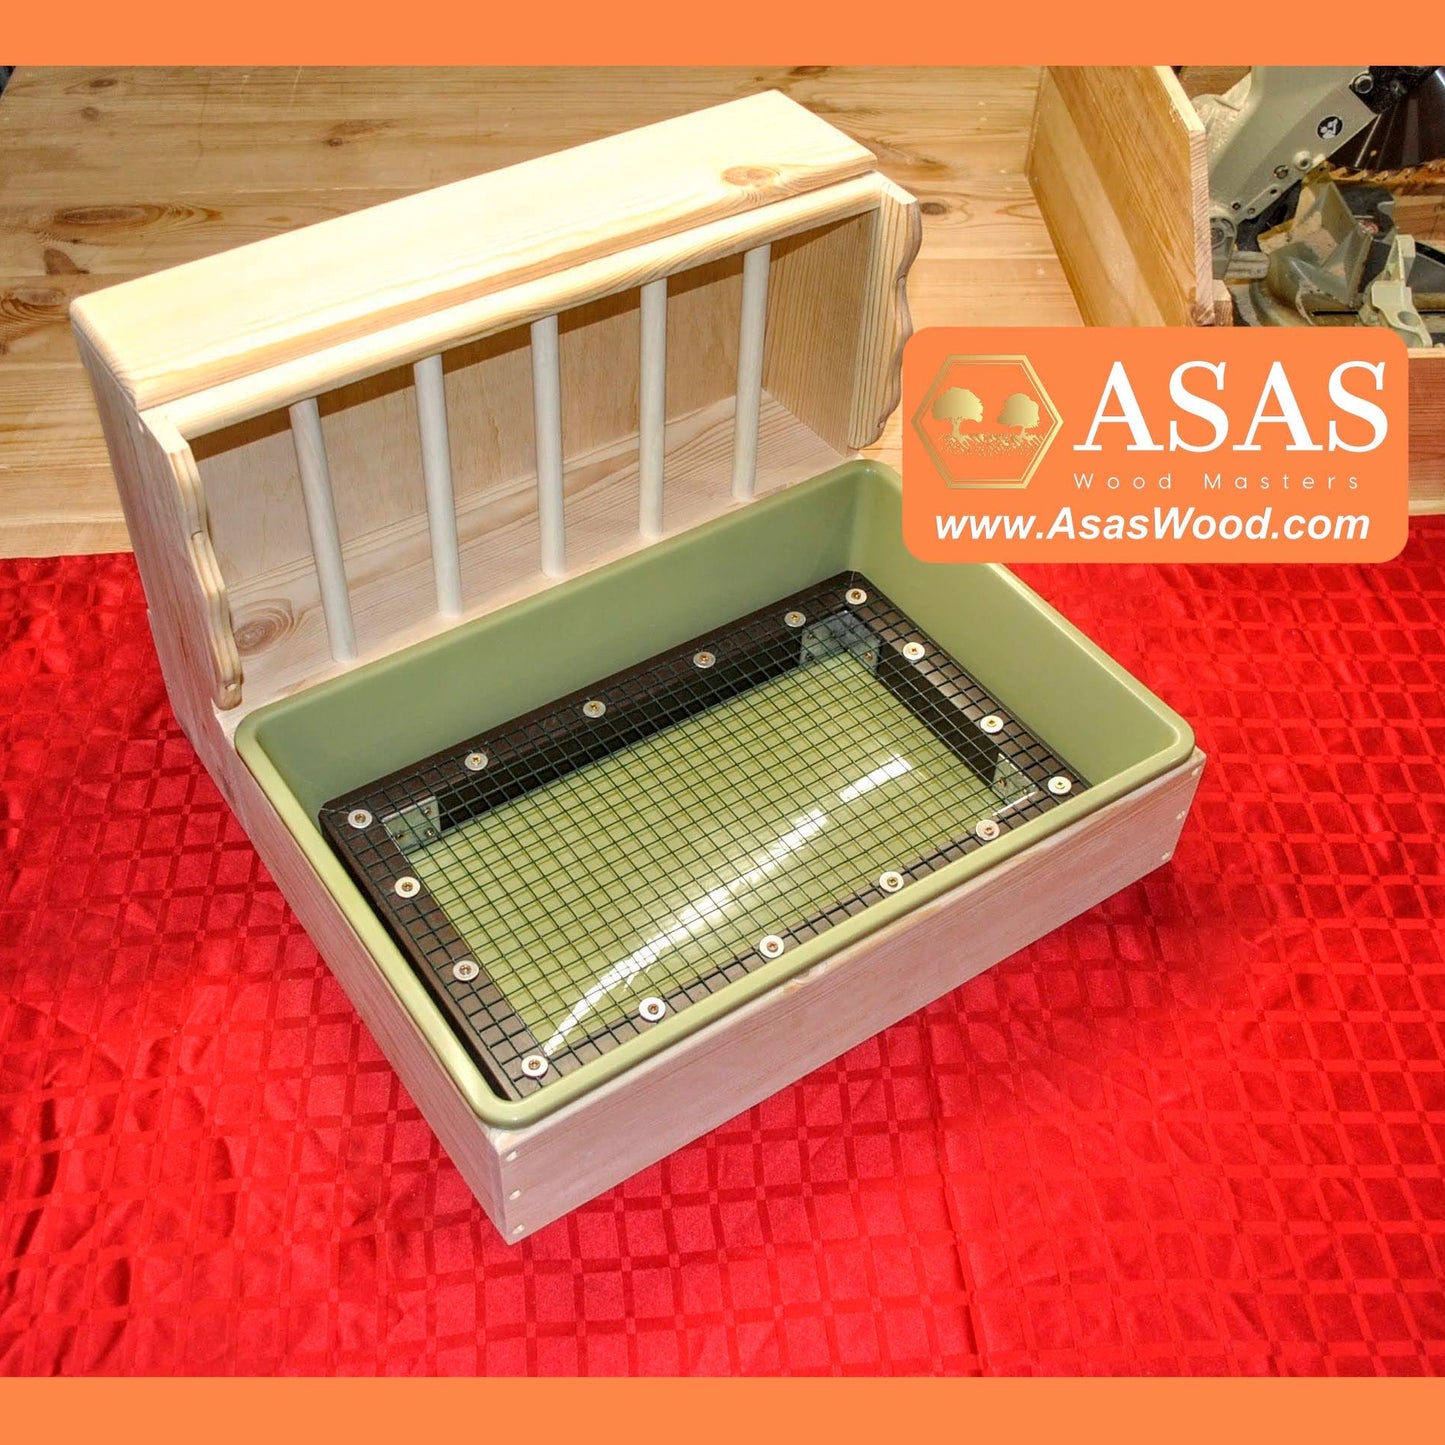 Rabbit hay feeder with litter box large size, made by asaswood